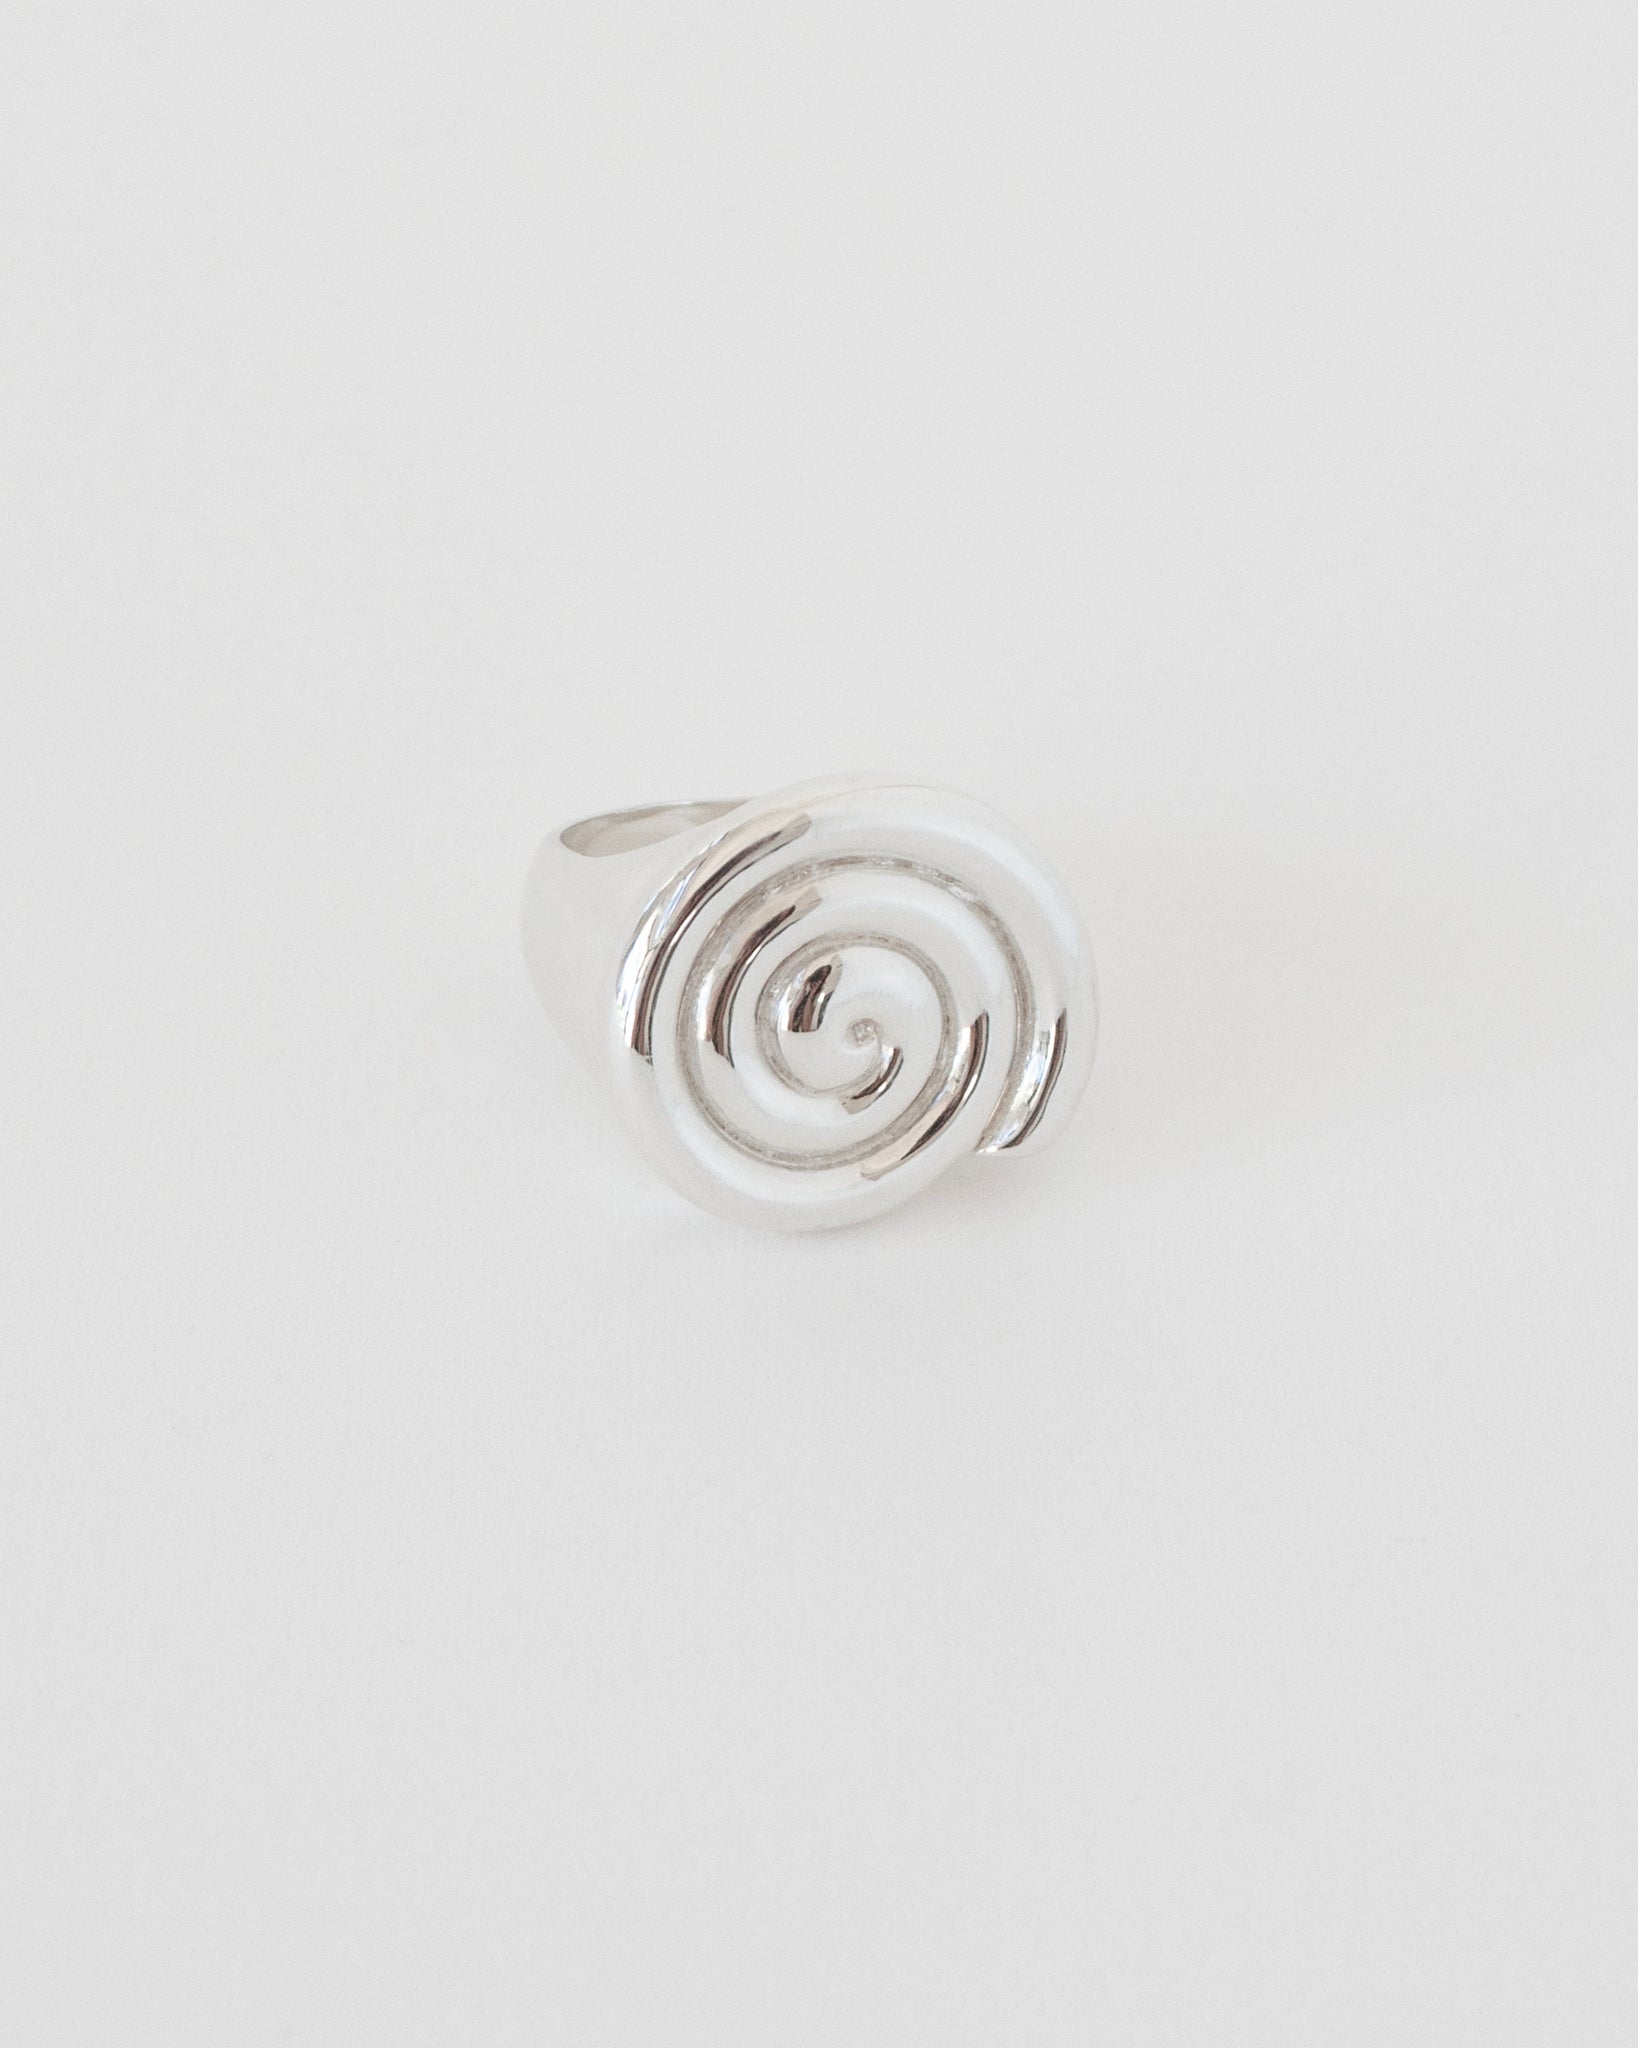 EXISTENTIAL SWIRL RING